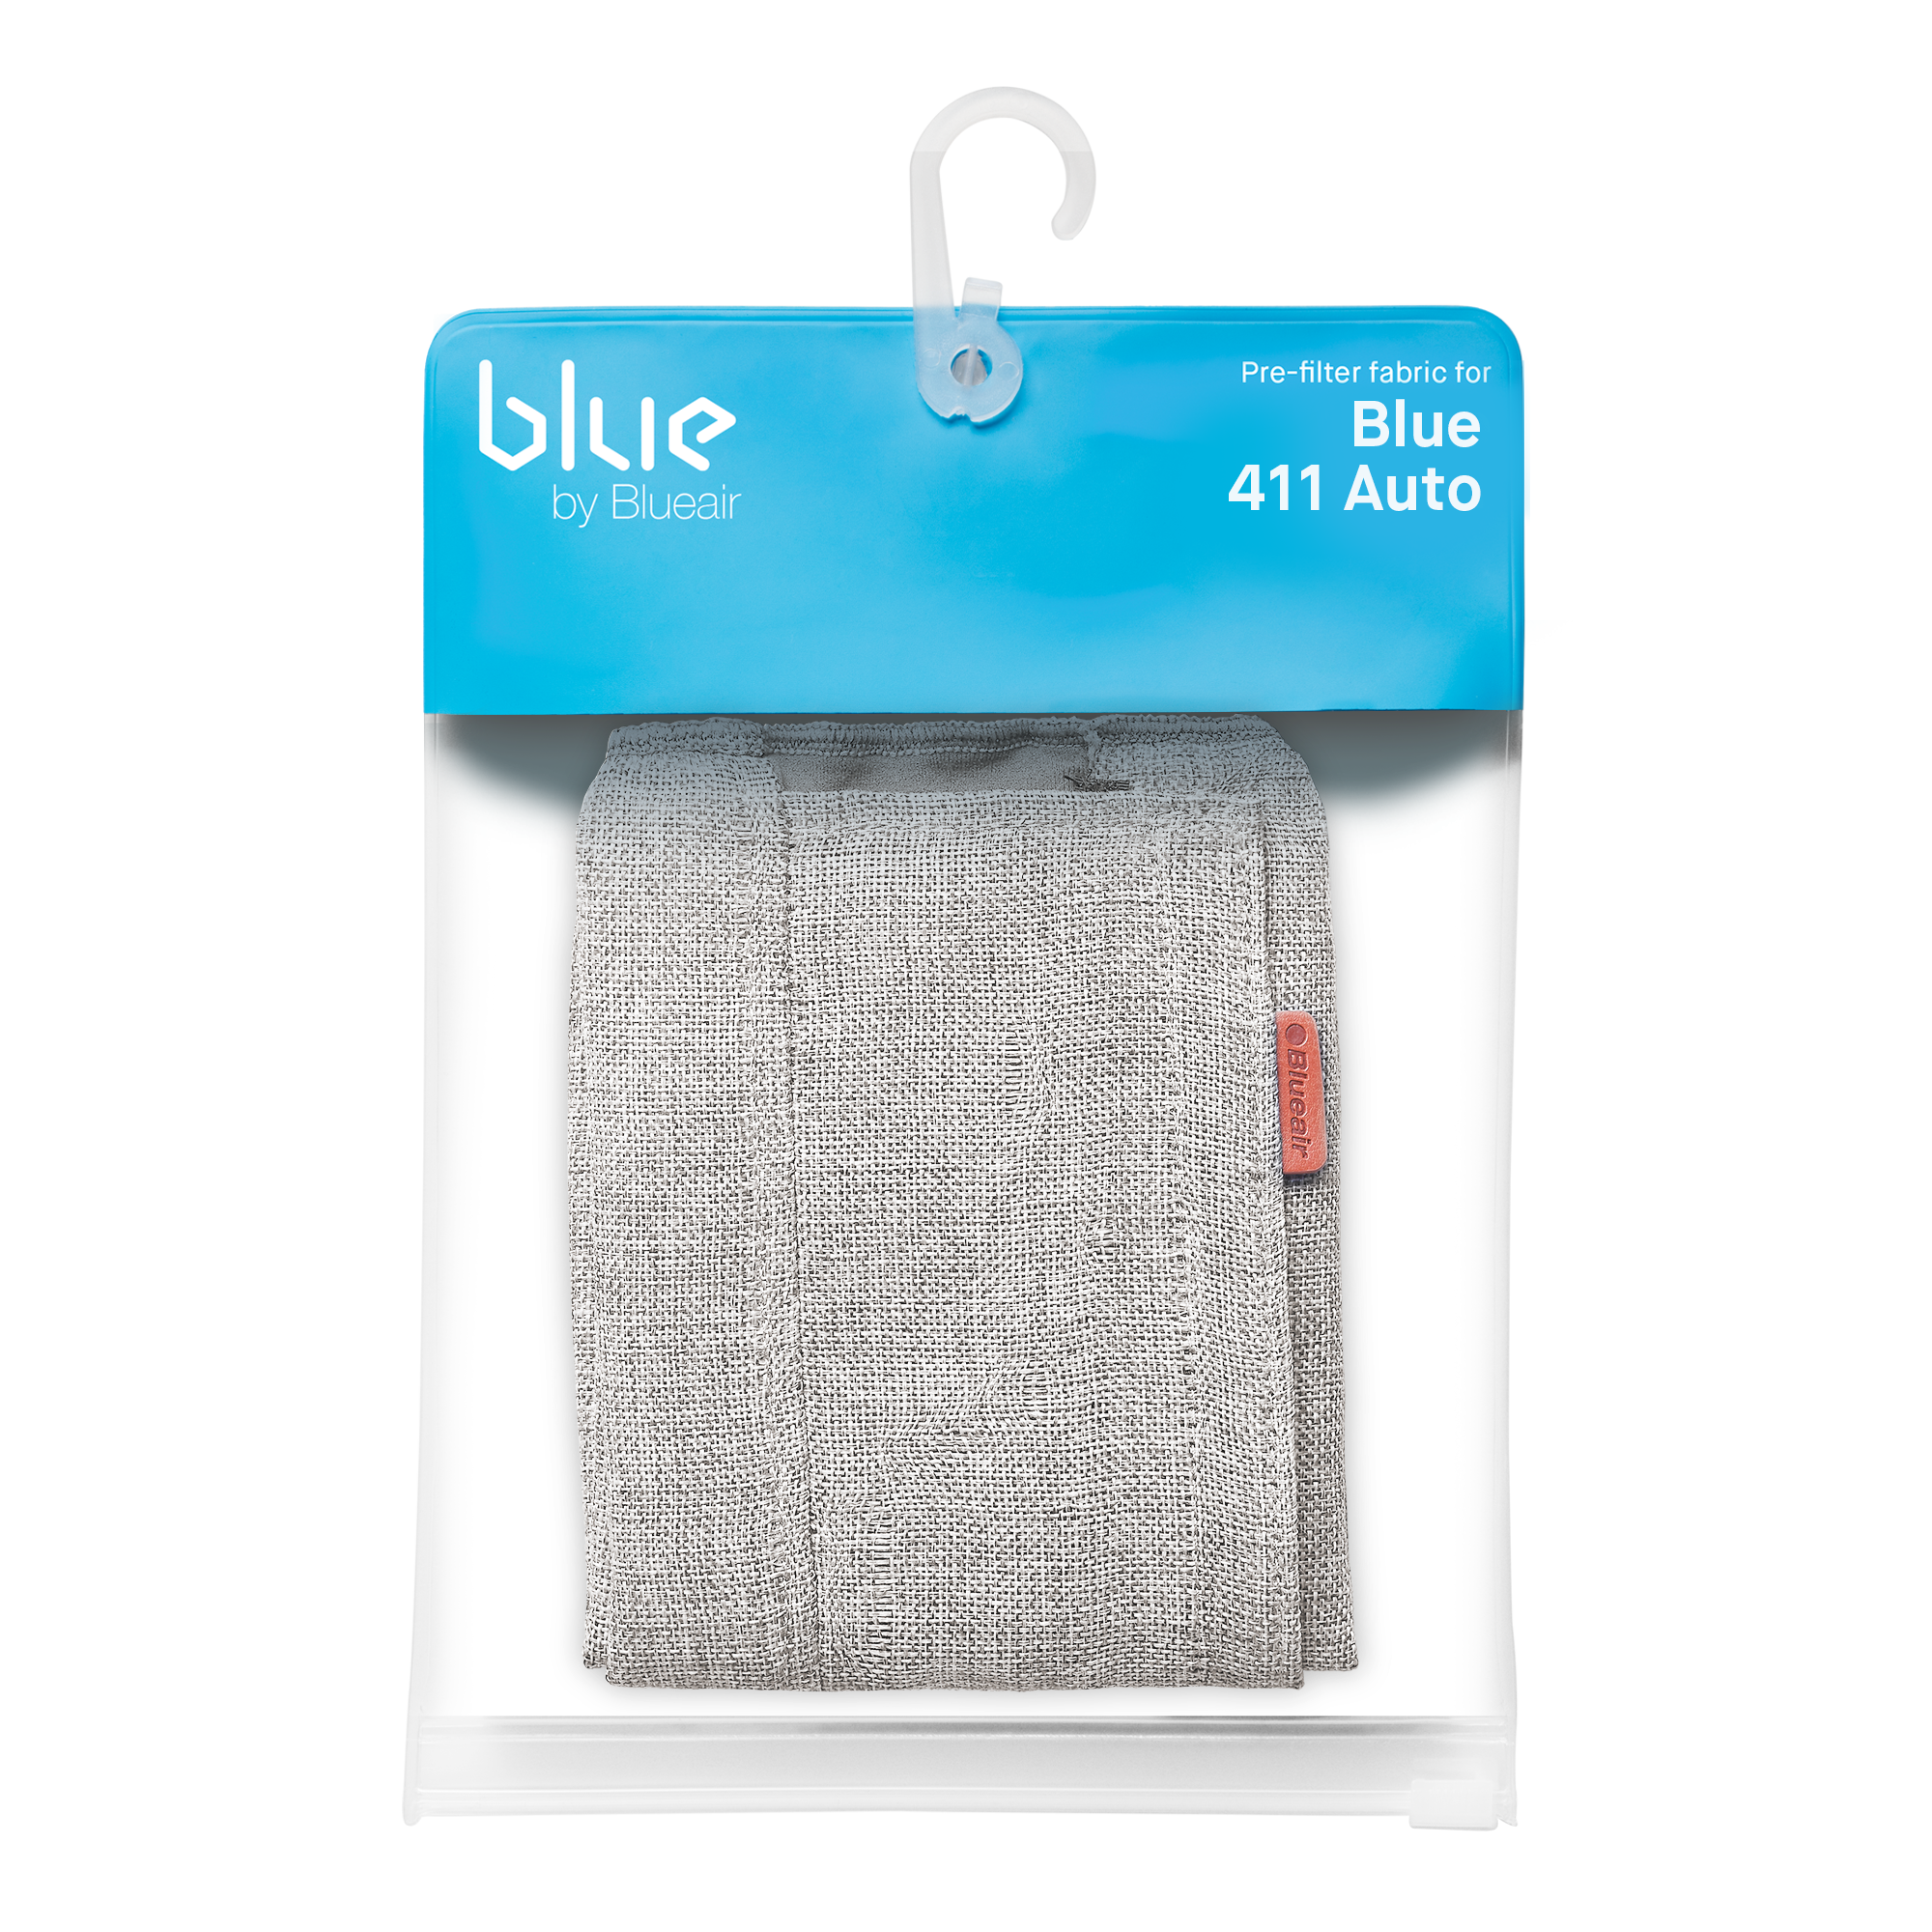 Catches Larger Particles Extending The Life Of The Main Filter Diva Blue Blueair Blue Pure 411 Air Purifier with Combination Filter For Rooms from 15m²-36m² & Pre-Filter for 411 Air Purifier